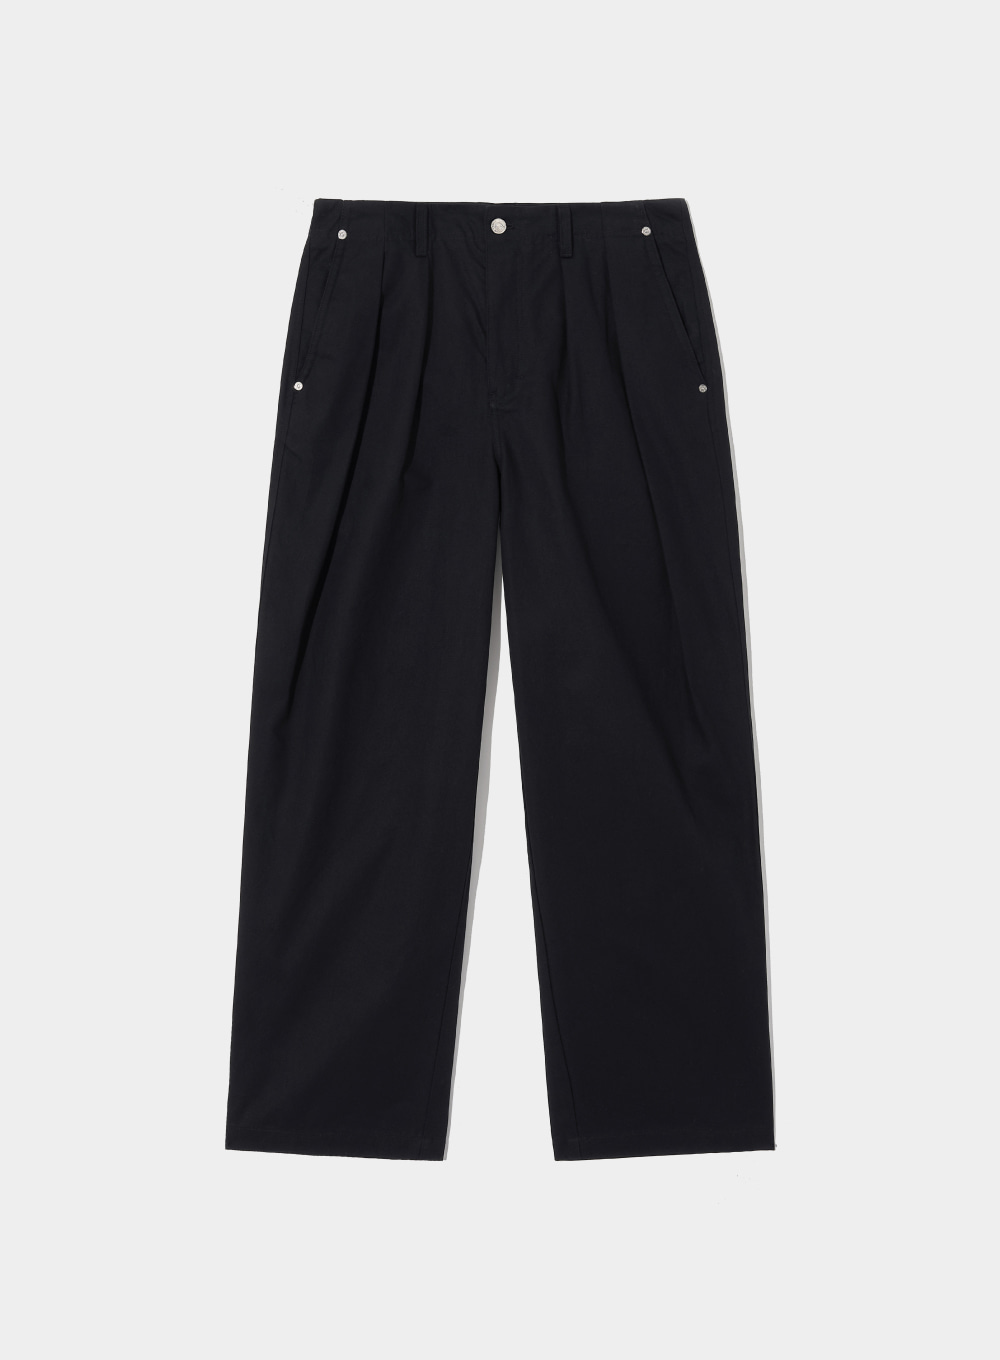 Two Tuck Wide Classic Chino Pants - Classic Black